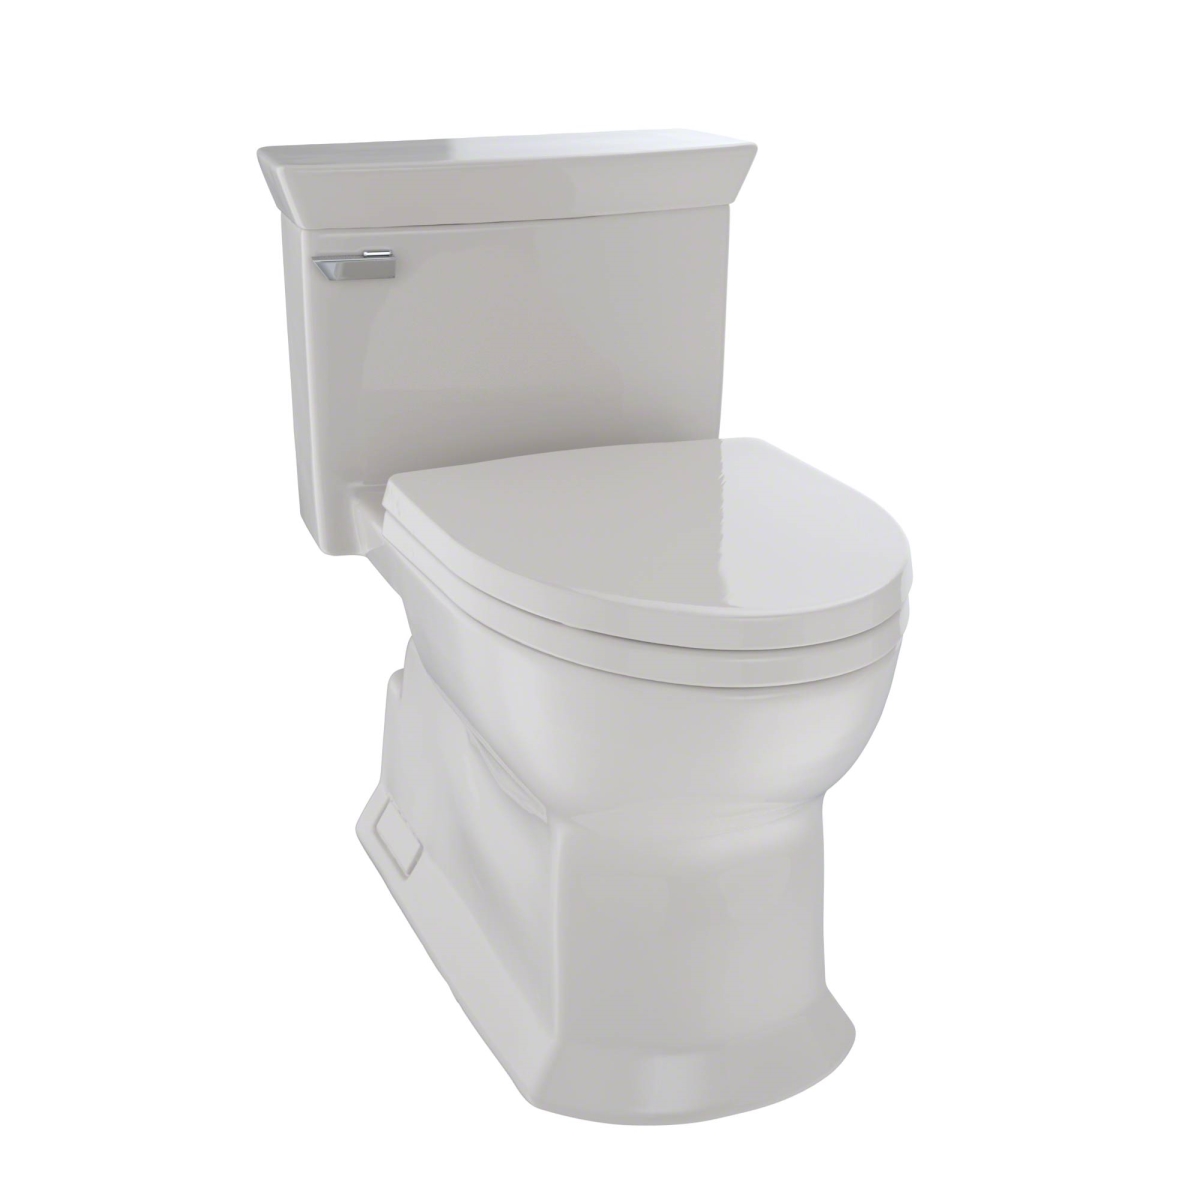 Ms964214cefg-12 Eco Soiree Elongated 1.28 Gpf Universal Height Skirted Toilet With Cefiontect, Sedona Beige